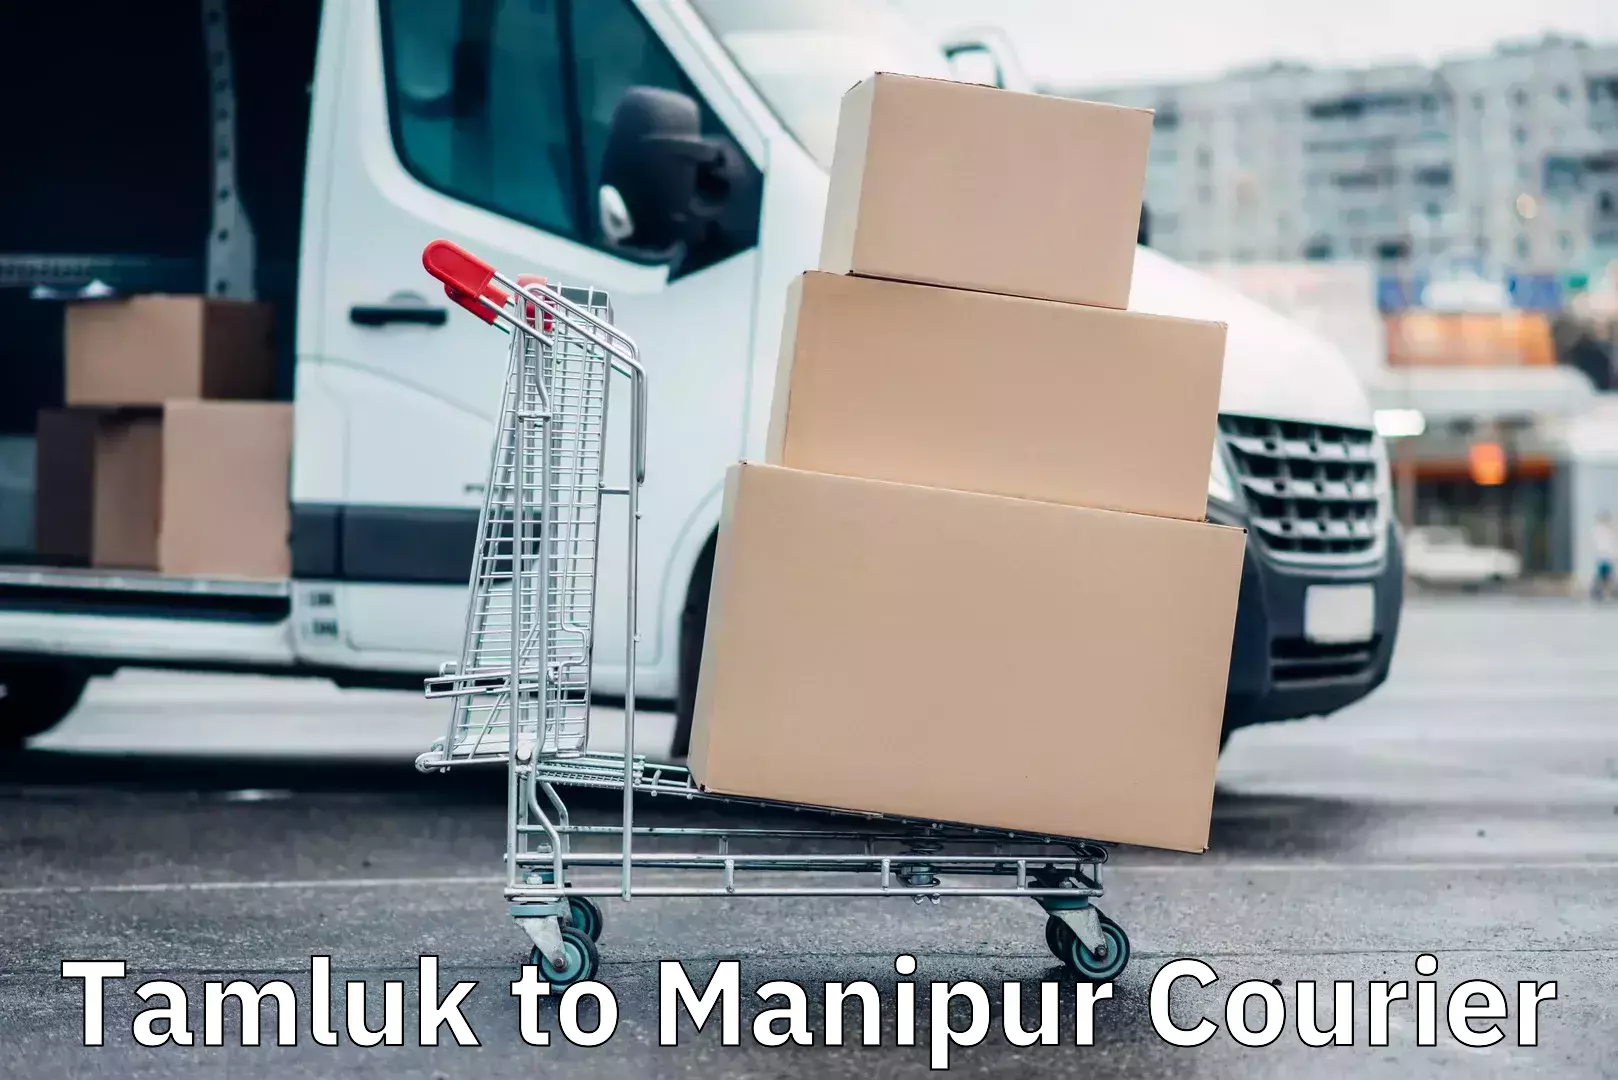 Modern delivery technologies Tamluk to Manipur